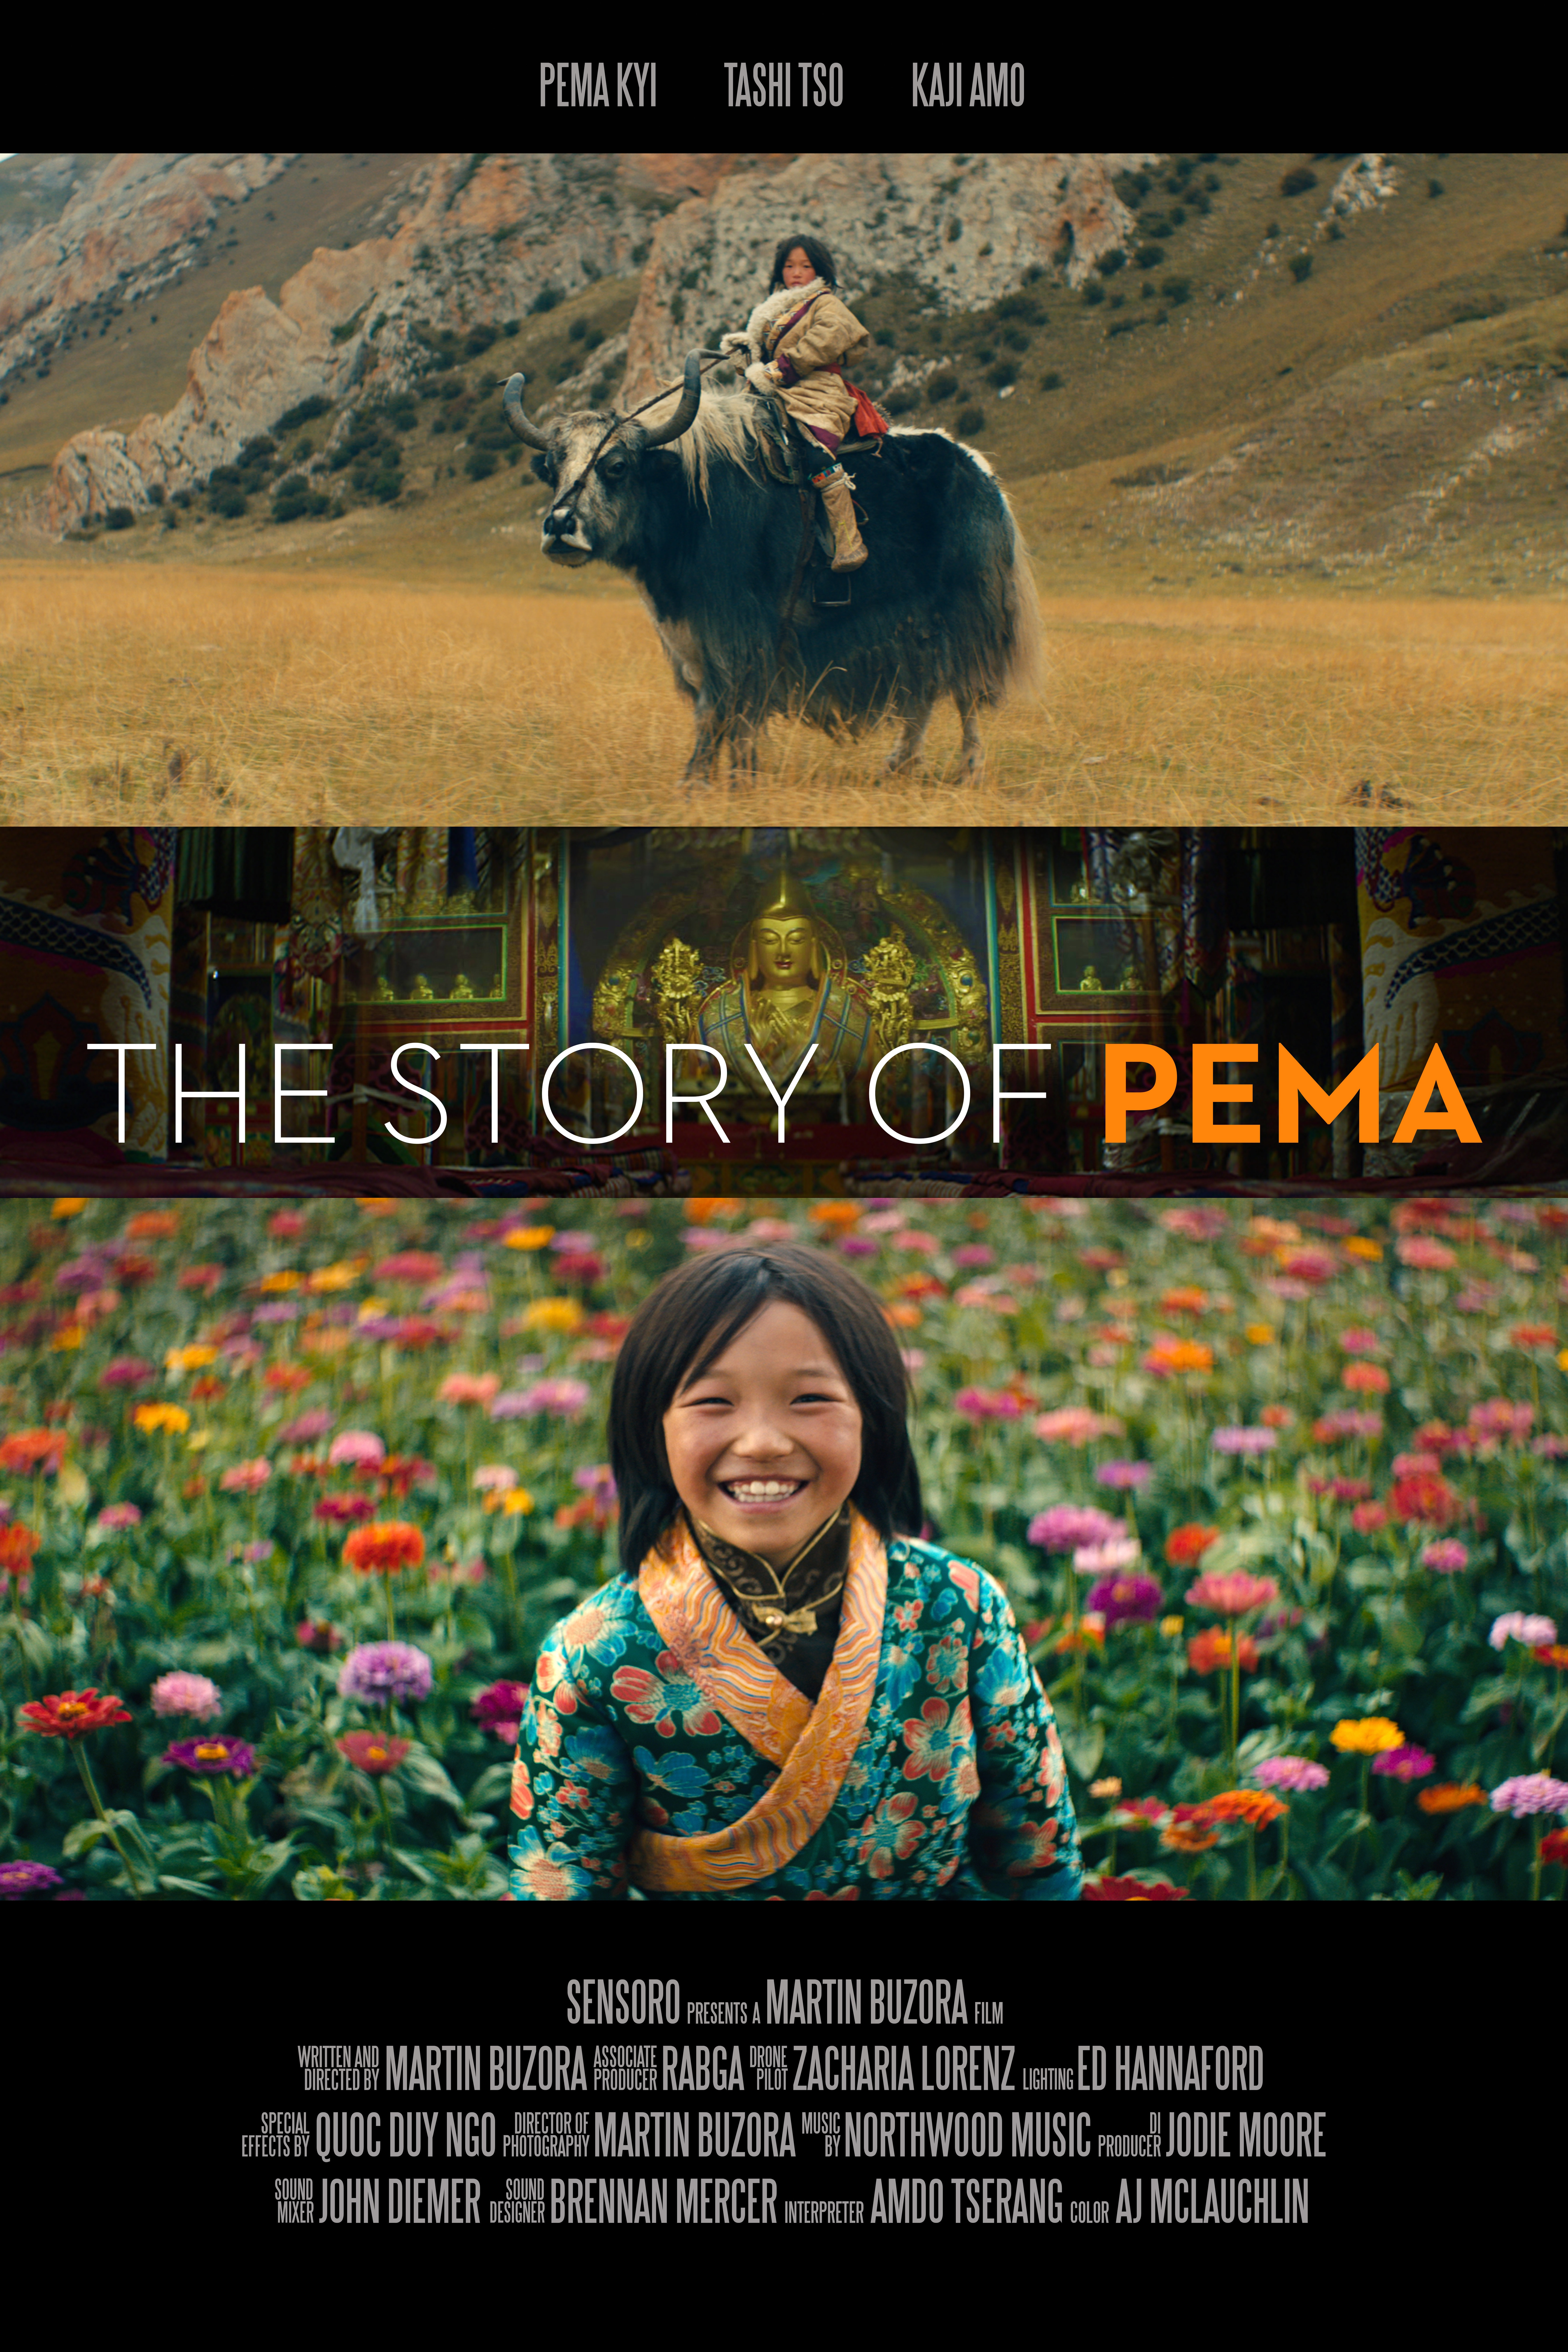 The Story of Pema